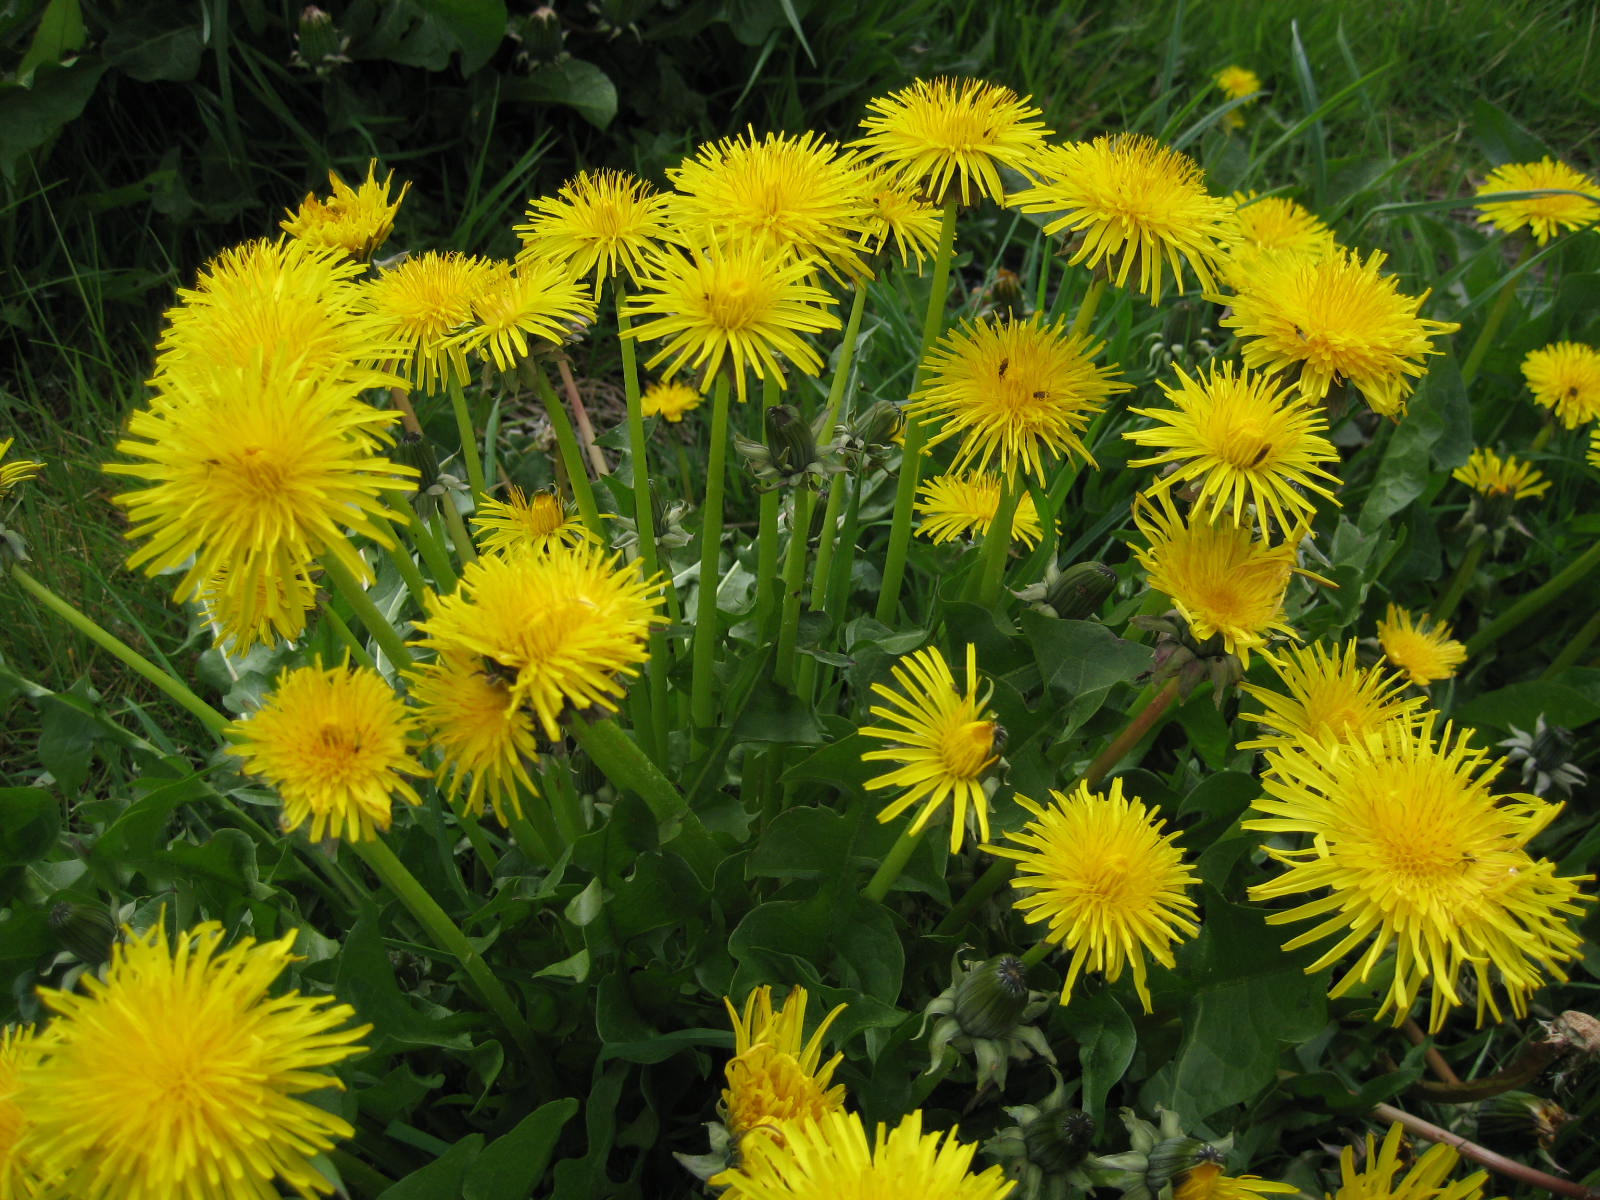 Image: Survival foraging: How to identify and use dandelion, a versatile weed